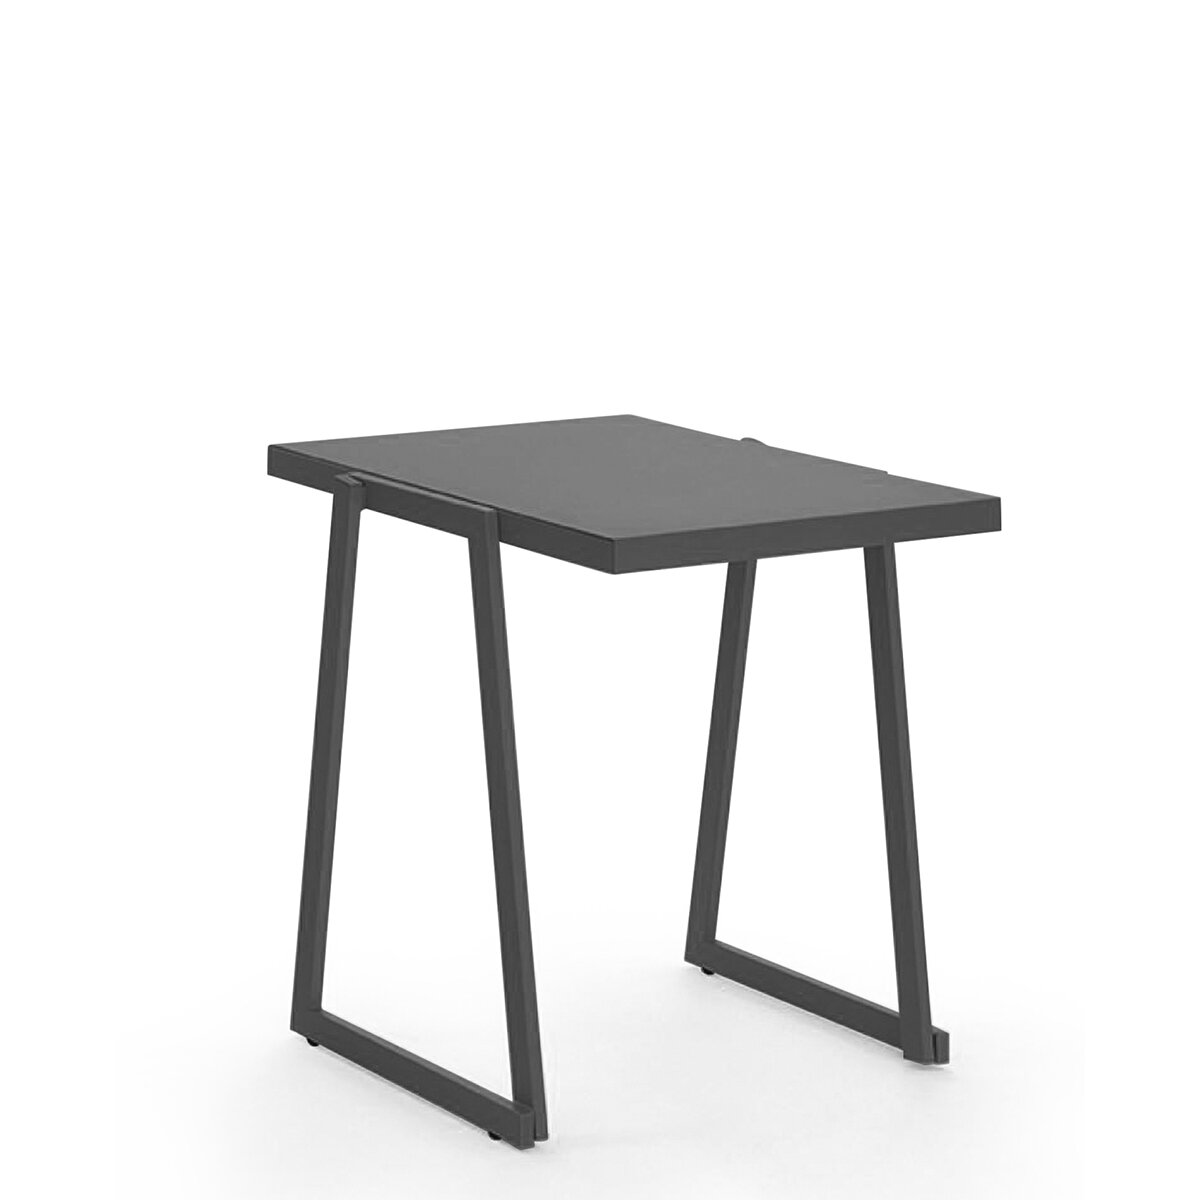 library-images-ctable-9a2-single-60x60-square-table-anthracite-finish.jpeg